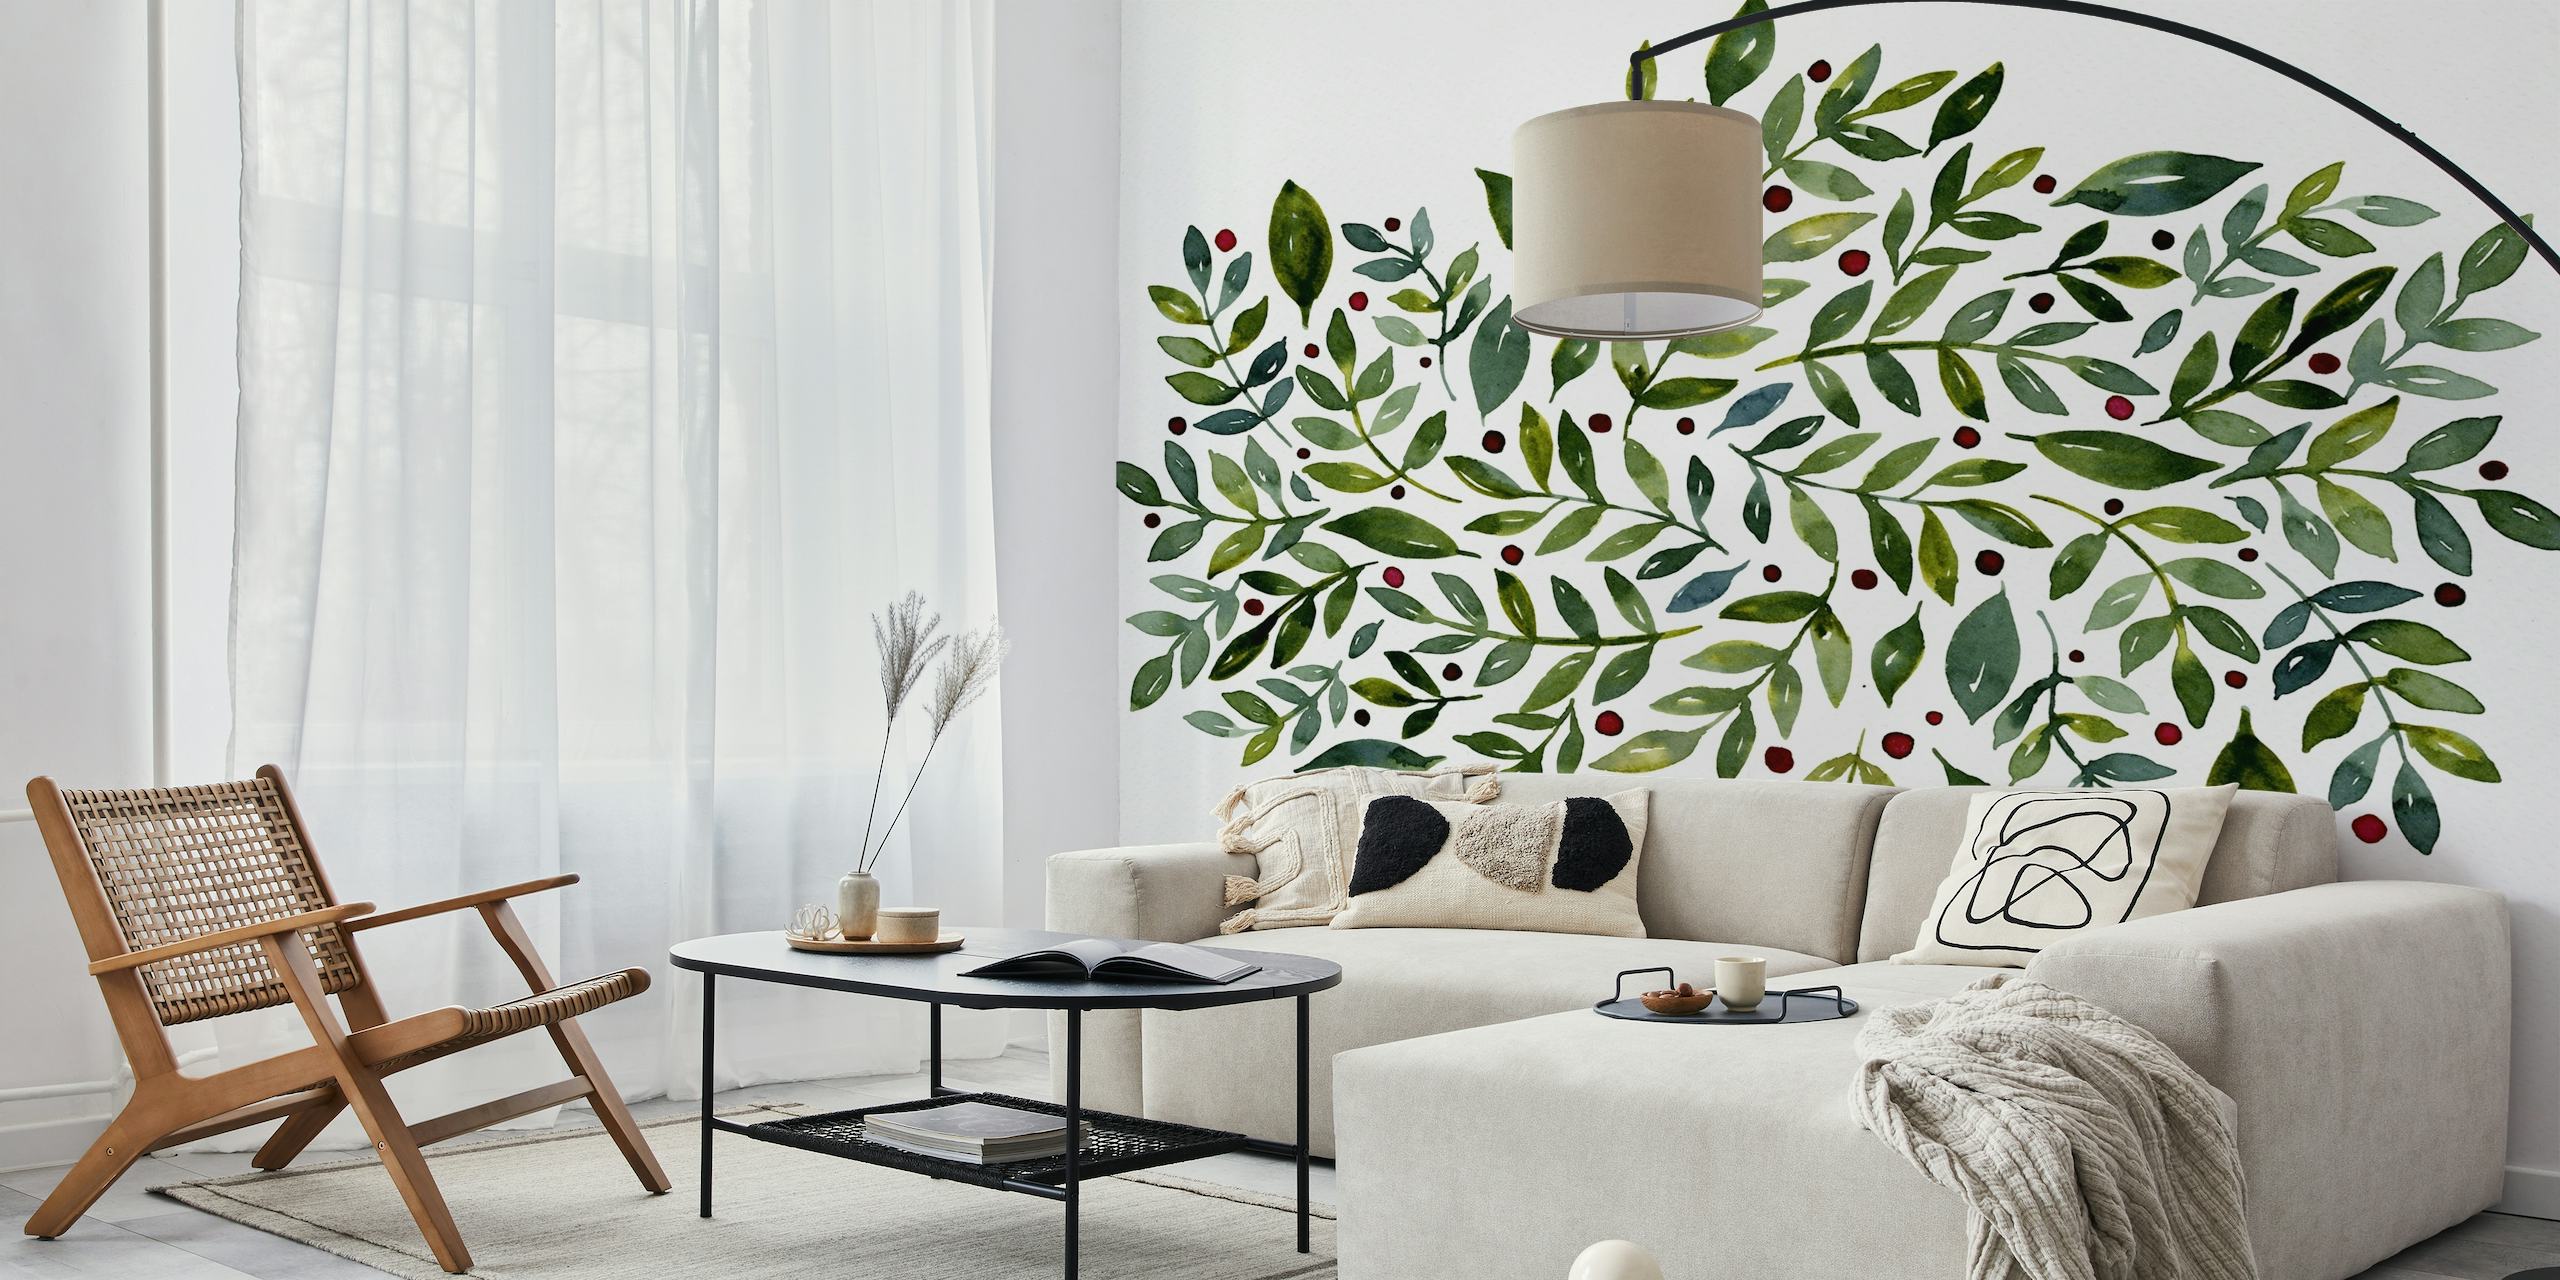 Illustrated green foliage and red berries wall mural design